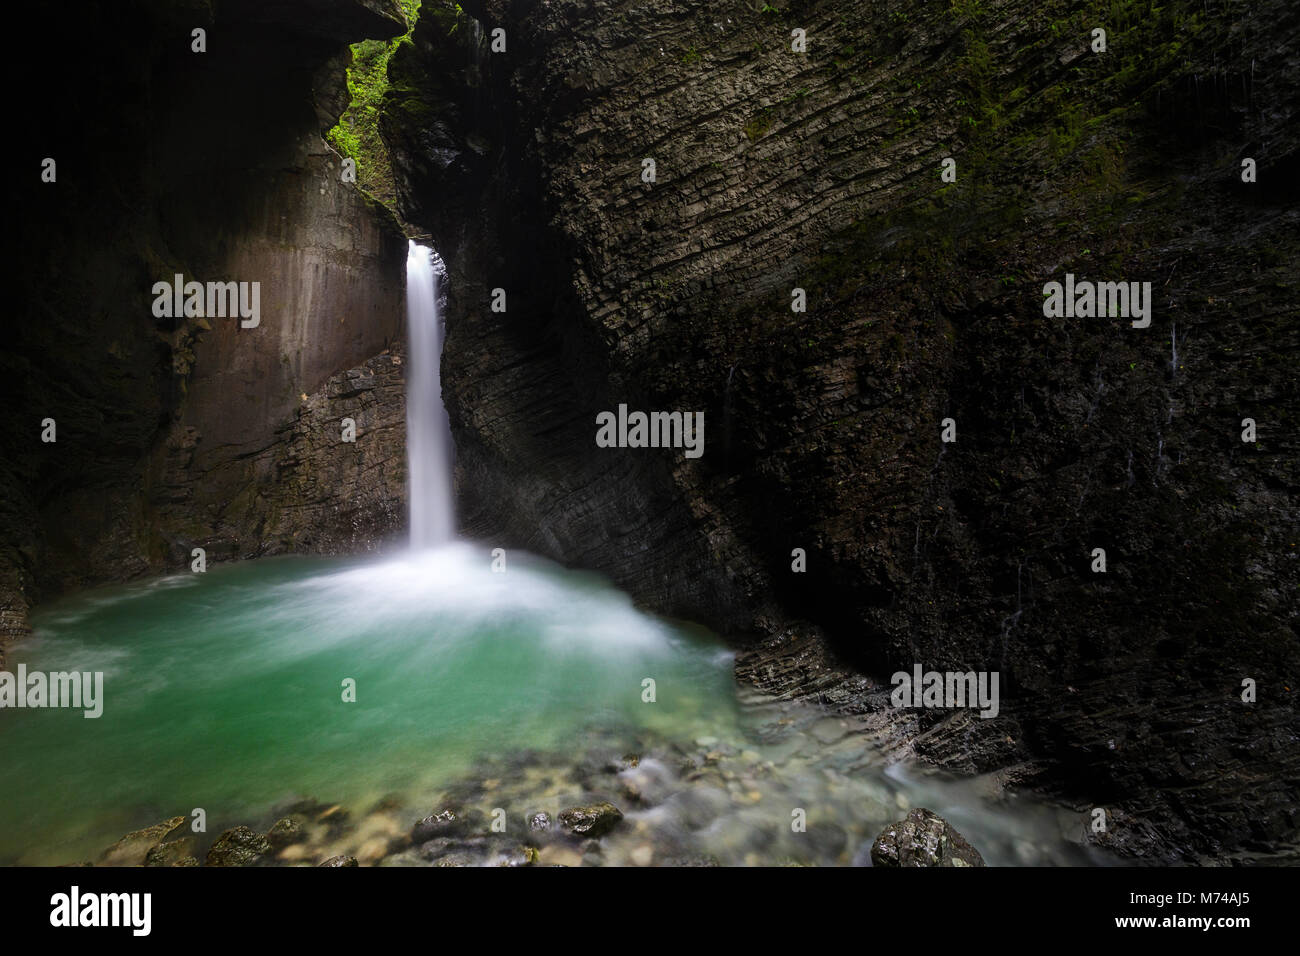 Hidden Kozjak waterfall streams out of layered, mossy rocks in a deep gorge, crystal clear pool. Stock Photo